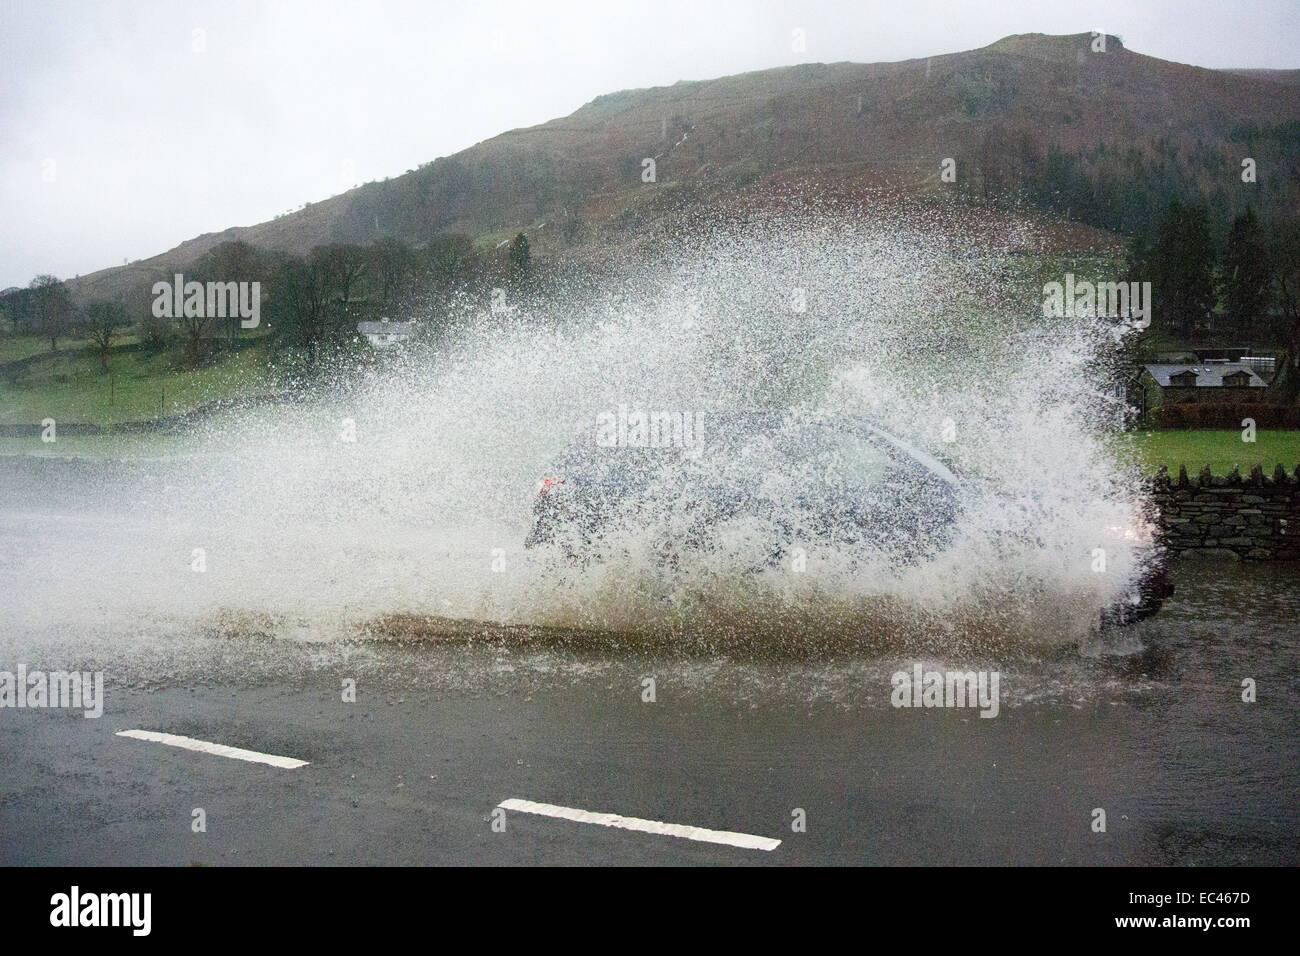 Traffic on the A591 at Grasmere in the English Lake District had to endure floods of water on the road. This stretch of road bet Stock Photo